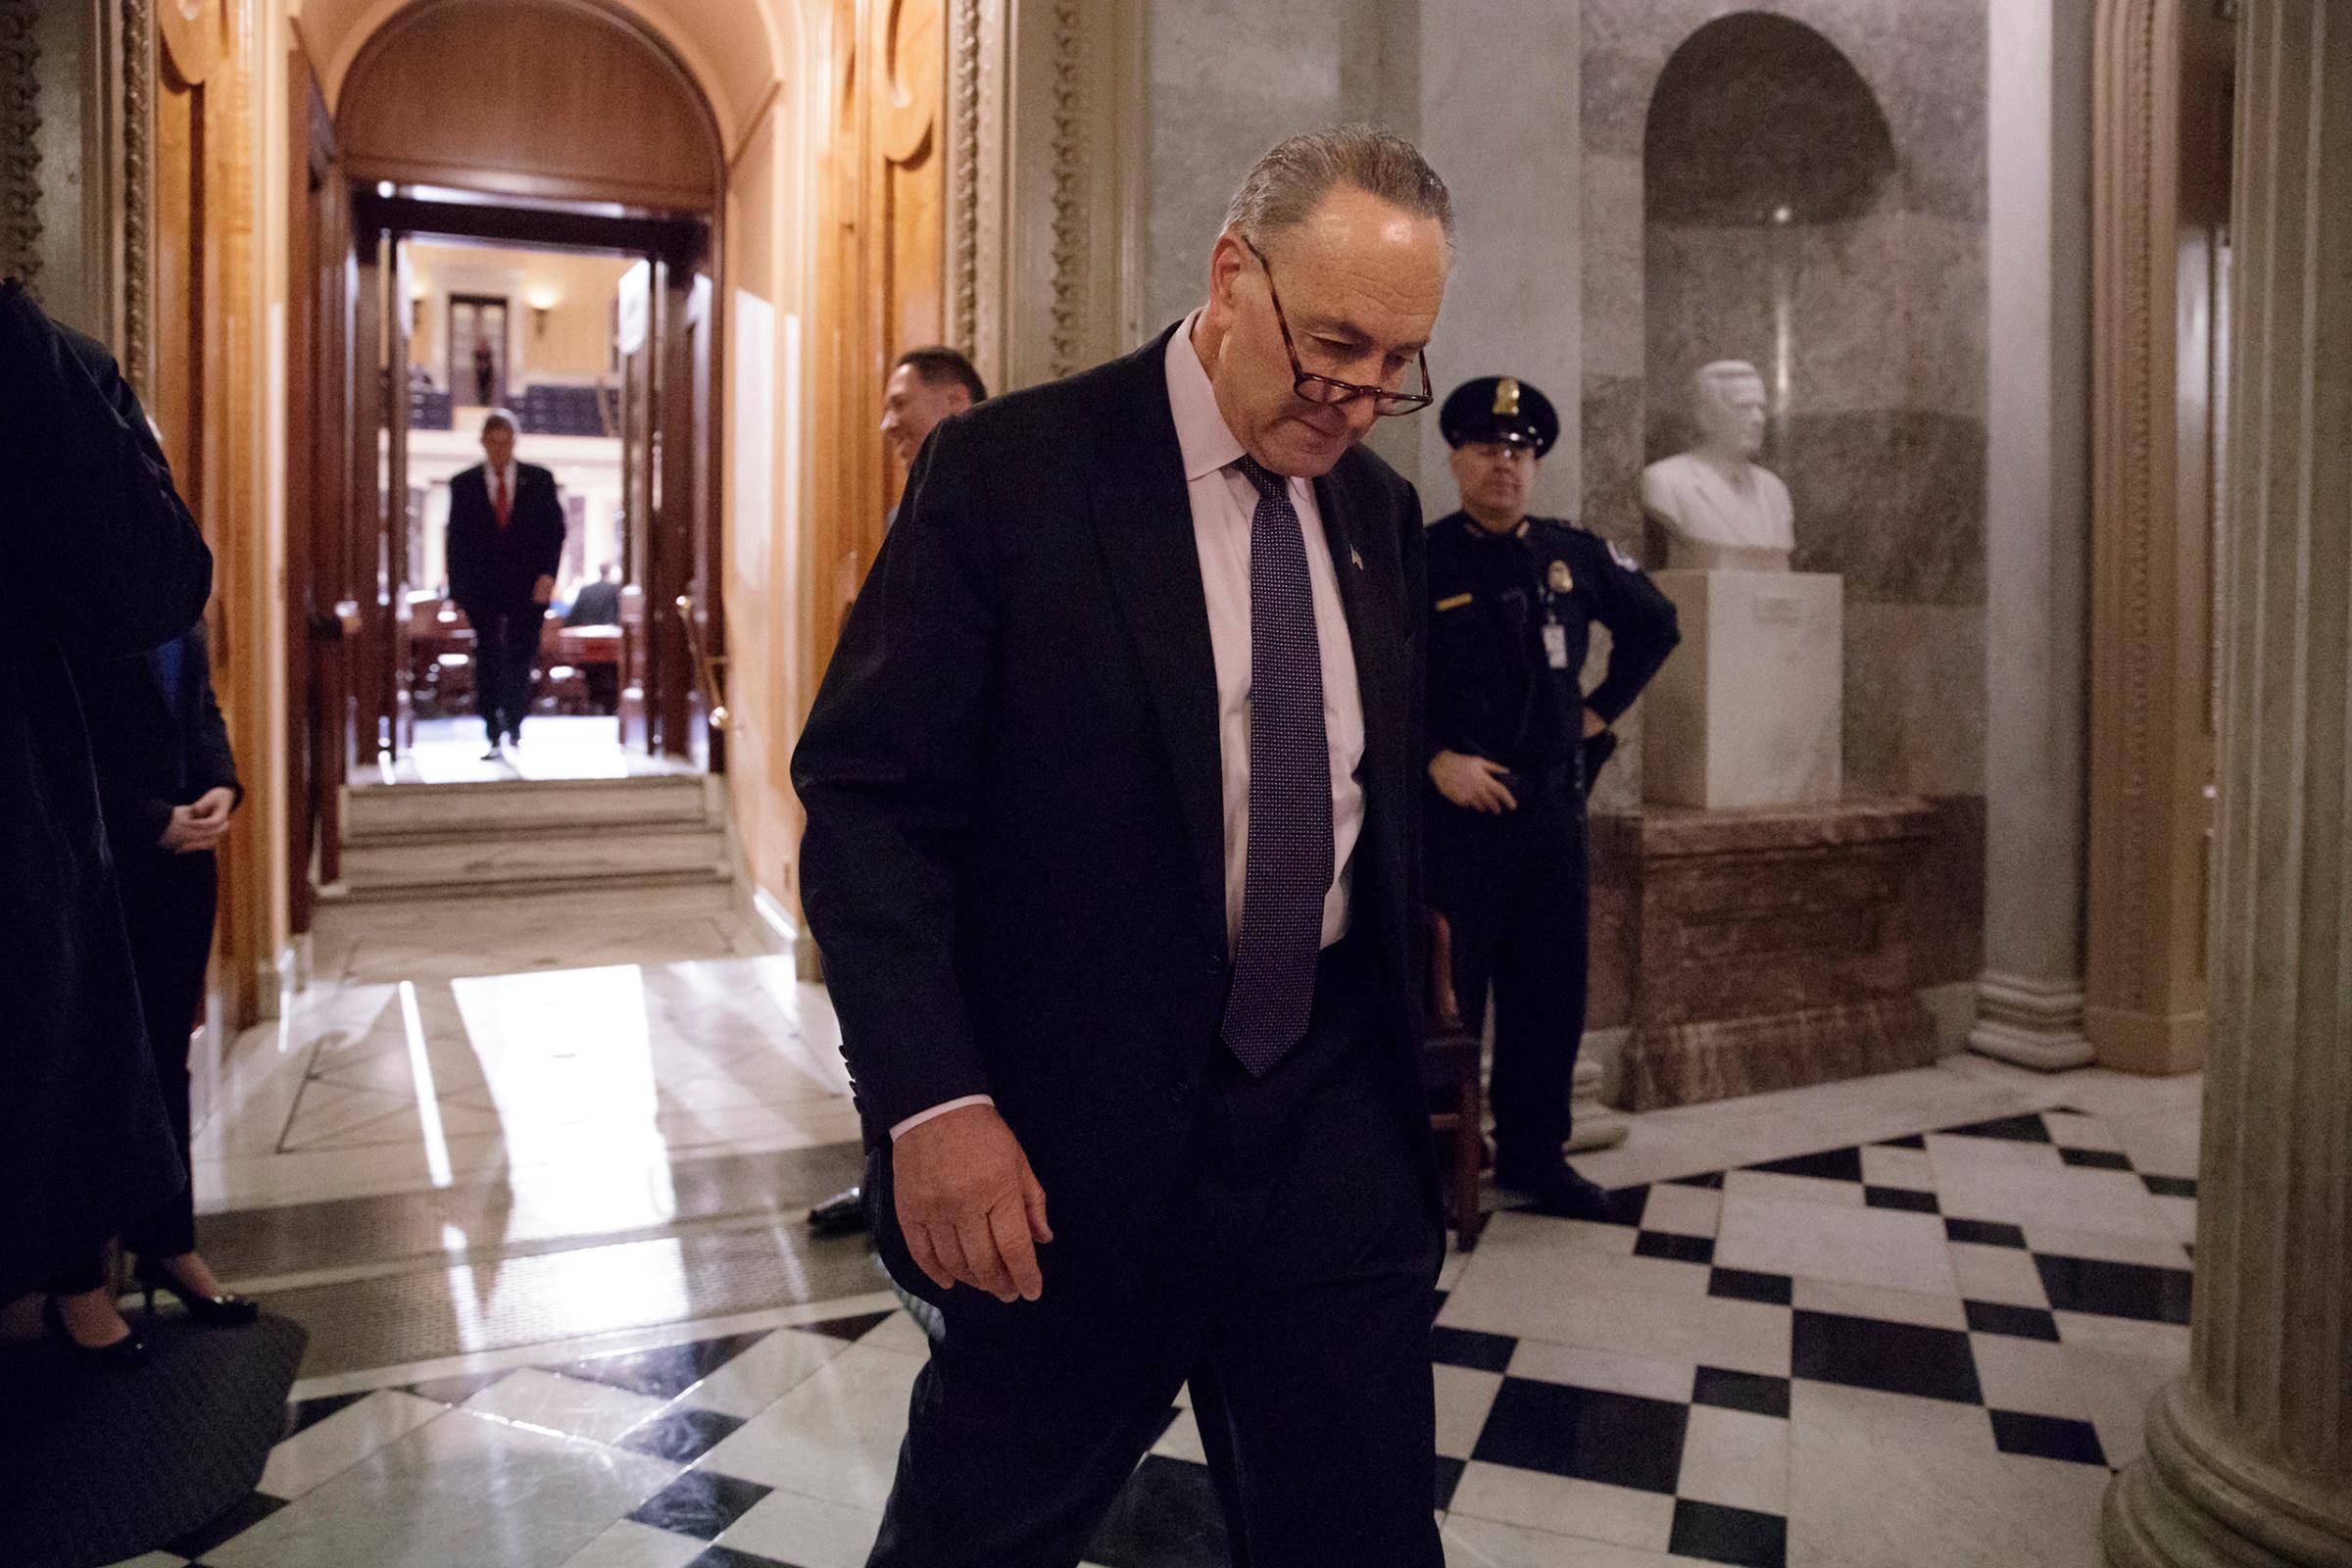 Senate Minority Leader Charles Schumer of N.Y. departs the Senate chamber, as lawmakers gathered for a predawn vote to advance the nomination of Education Secretary-designate Betsy DeVos, Washington, D.C., Feb. 3, 2017.